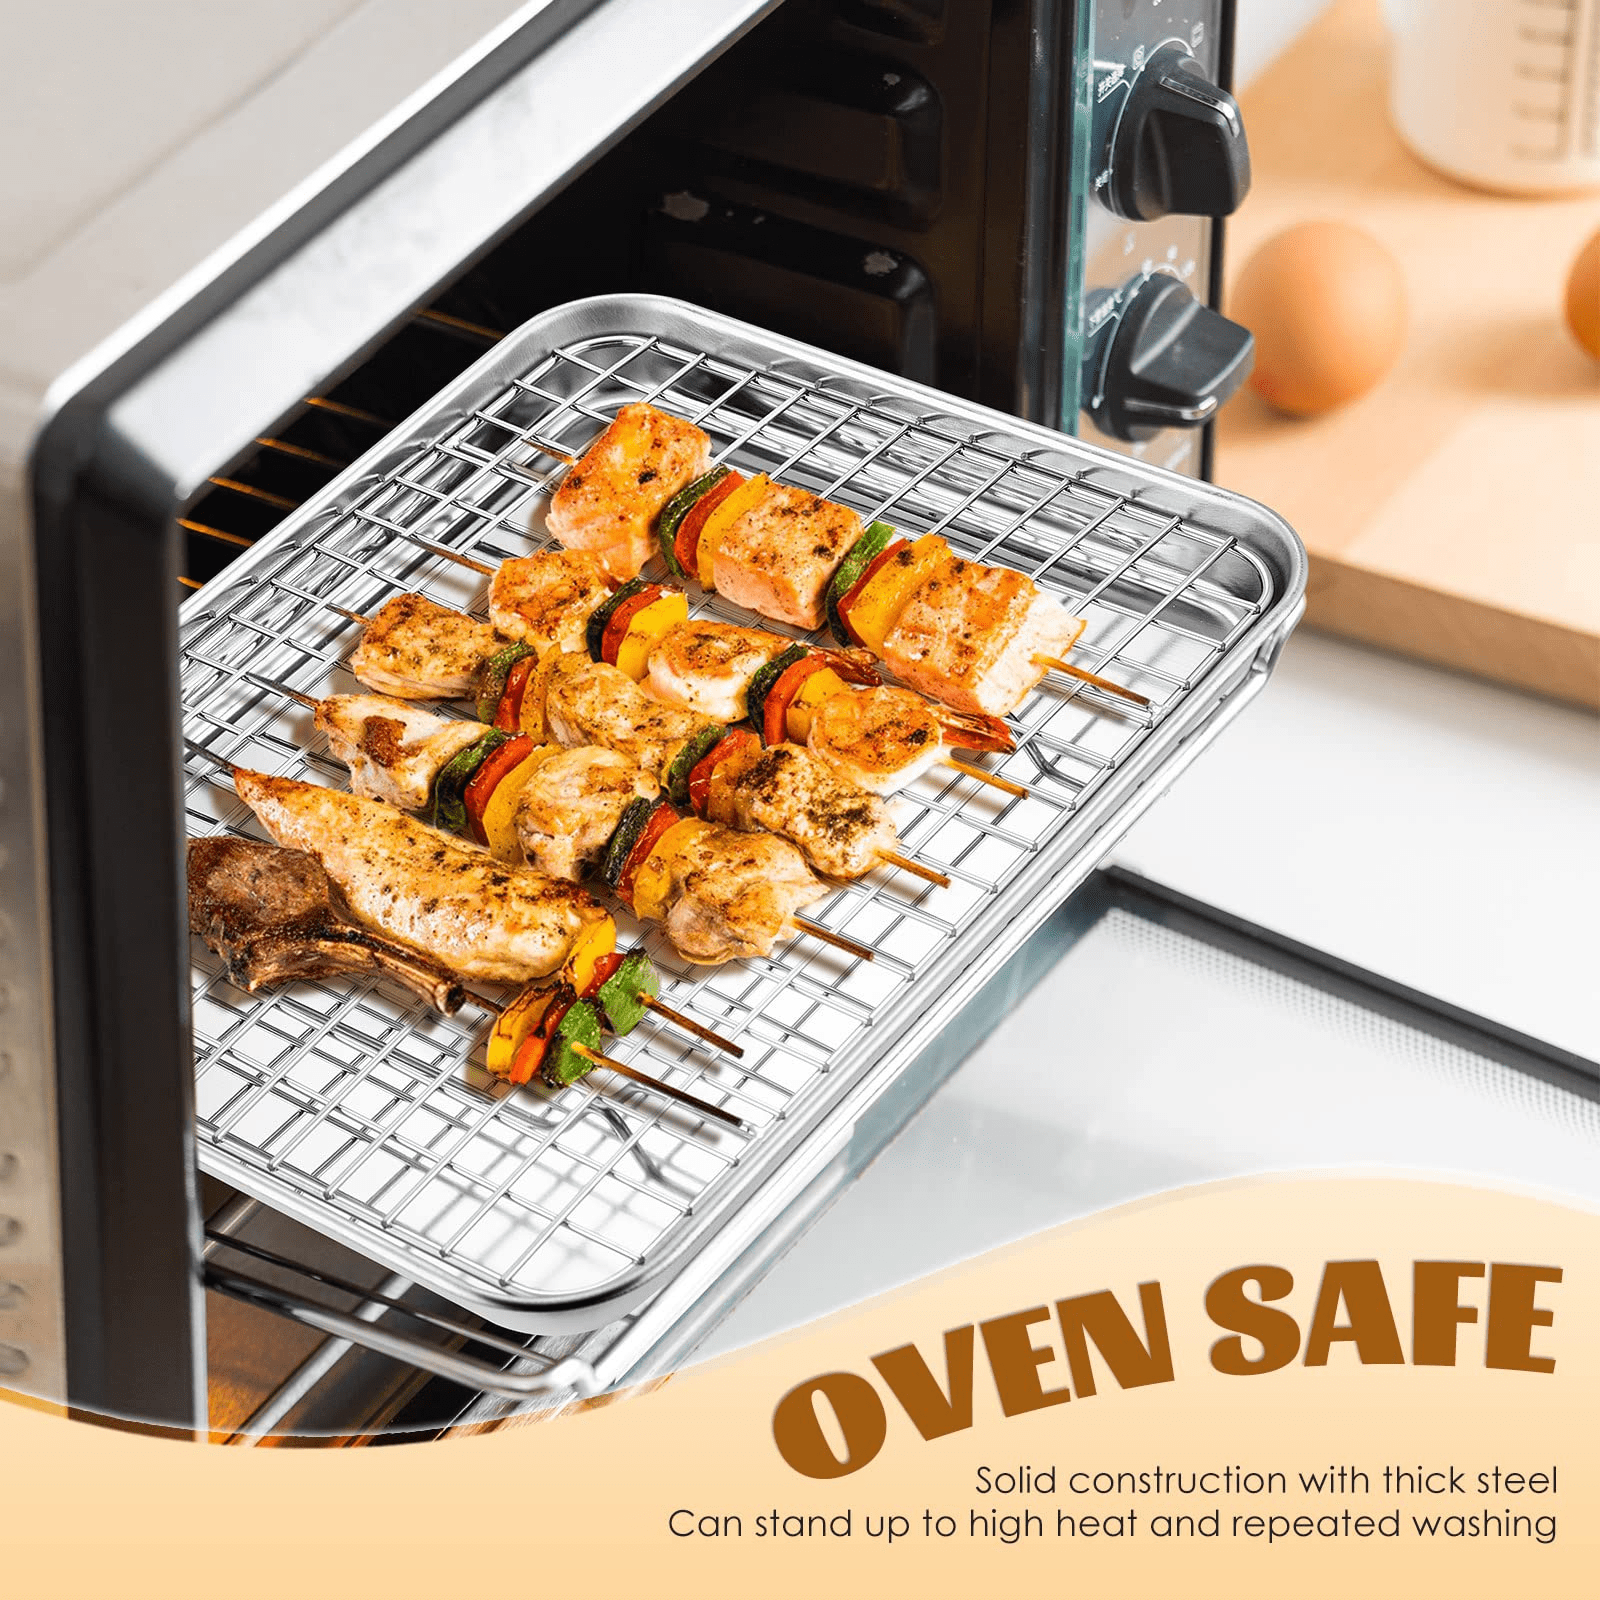 Cookie Sheet with Rack Set, E-far 16”x12” Stainless Steel Baking Sheet Pan  for Oven Cooking, Rimmed Metal Tray with Wire Rack & Silicone Baking Mat